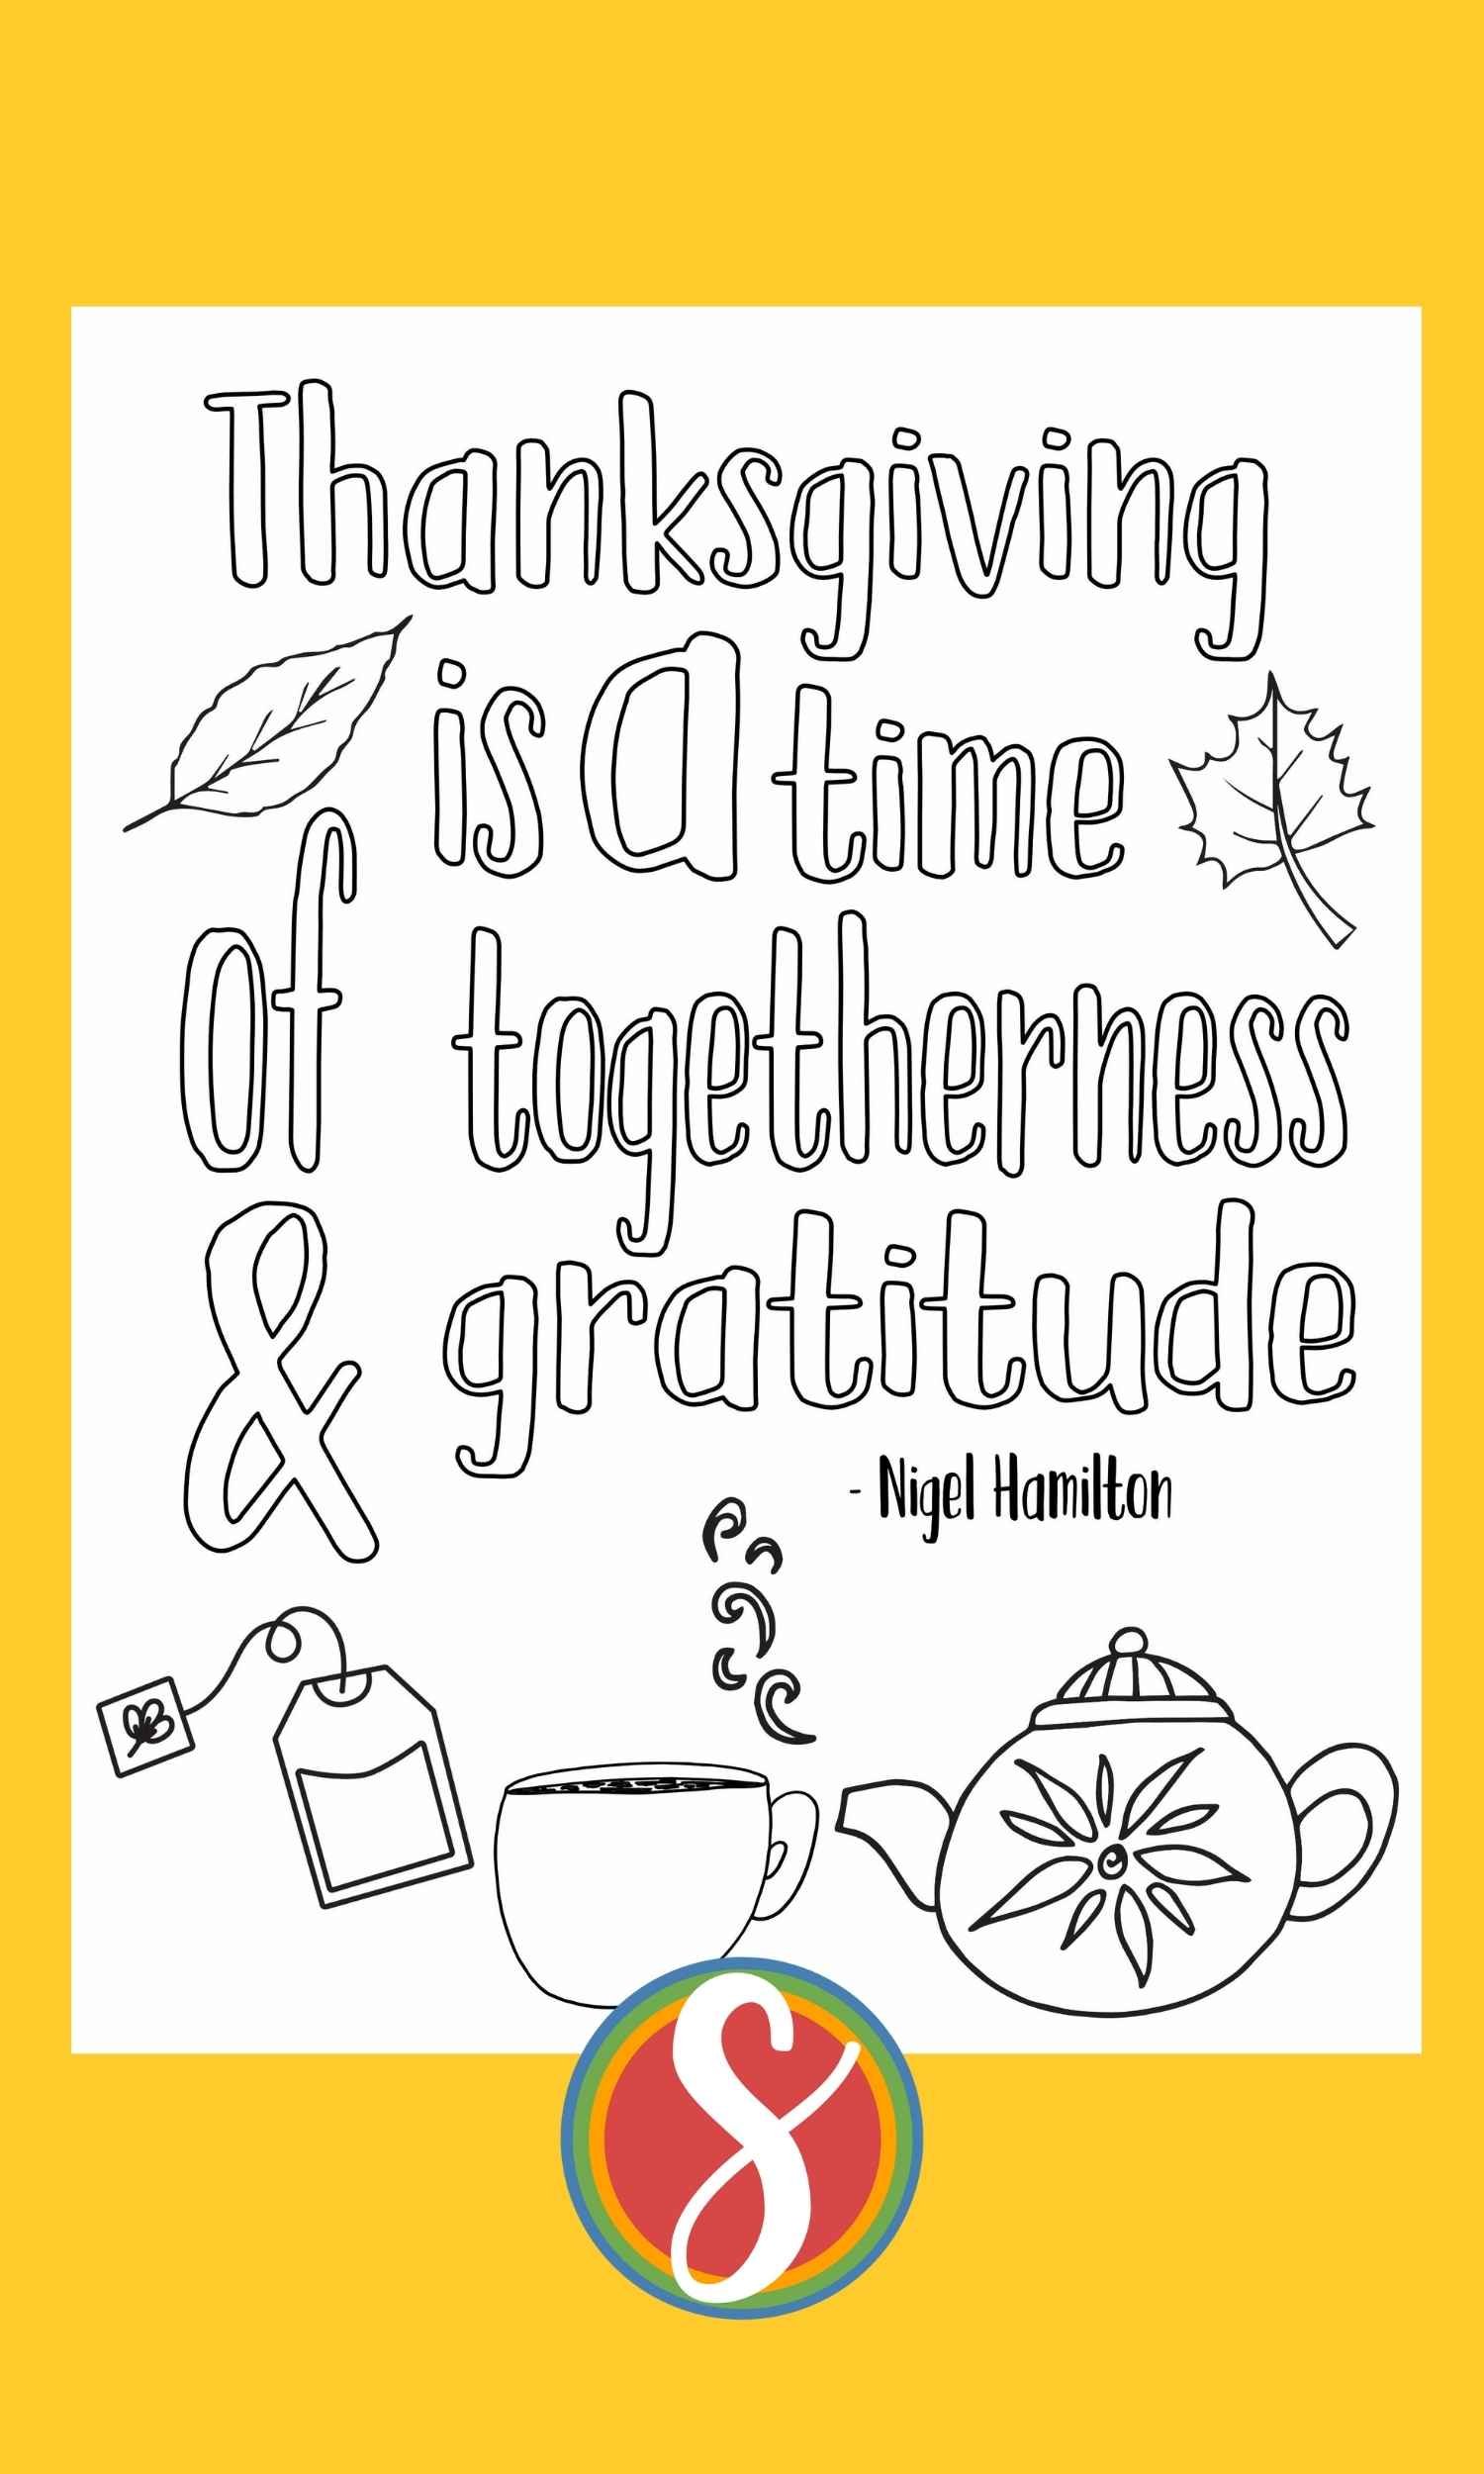 colorable text "thanksgiving is a time of togetherness & gratitude" teapot, teacup, tea bag leaves